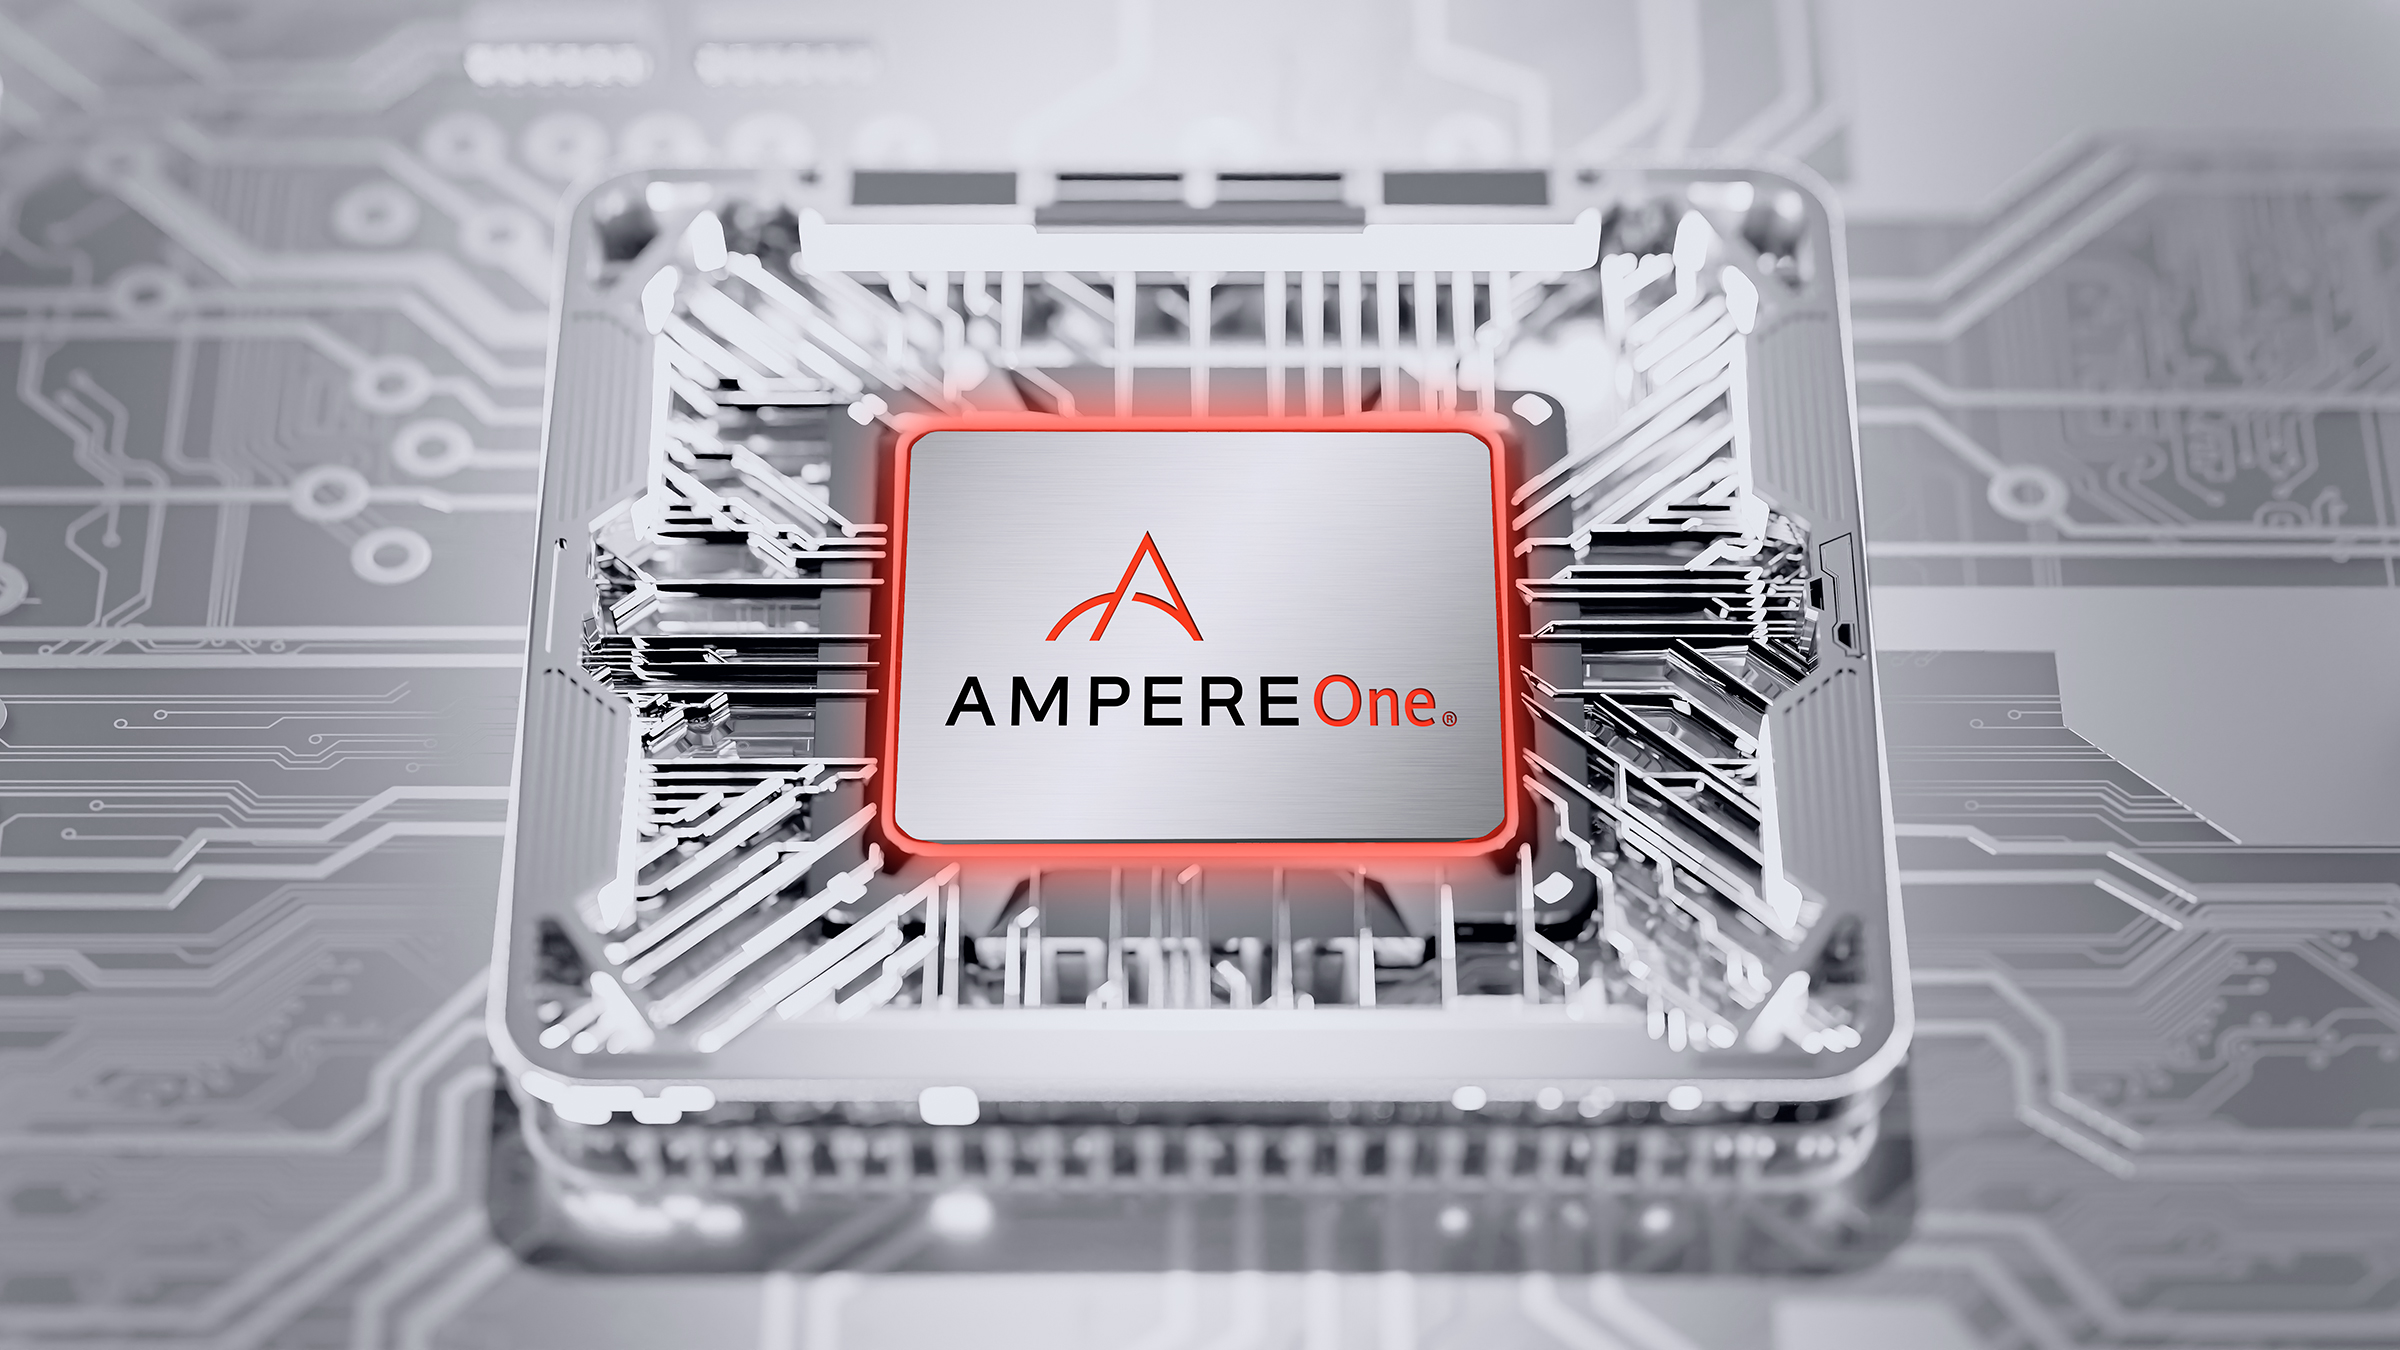 Ampere to integrate its CPUs with Qualcomm’s cloud-based AI chips for running large models [Video]